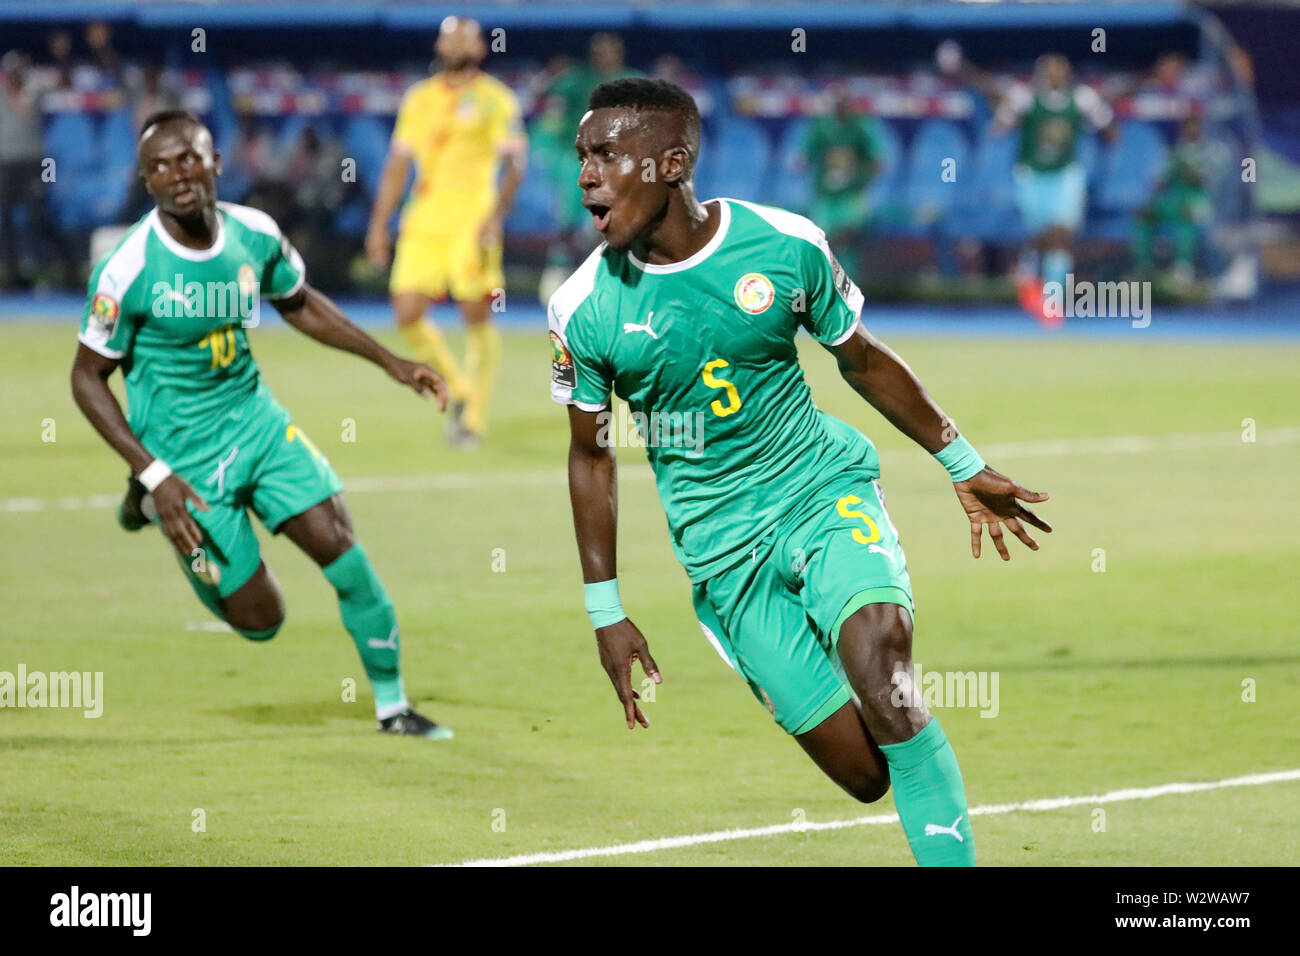 Cairo, Egypt. 10th July, 2019. Idrissa Gana Gueye (Front) of Senegal celebrates scoring during the quarterfinal between Senegal and Benin at the 2019 African Cup of Nations in Cairo, Egypt, July 10, 2019. Credit: Wang Teng/Xinhua/Alamy Live News Stock Photo